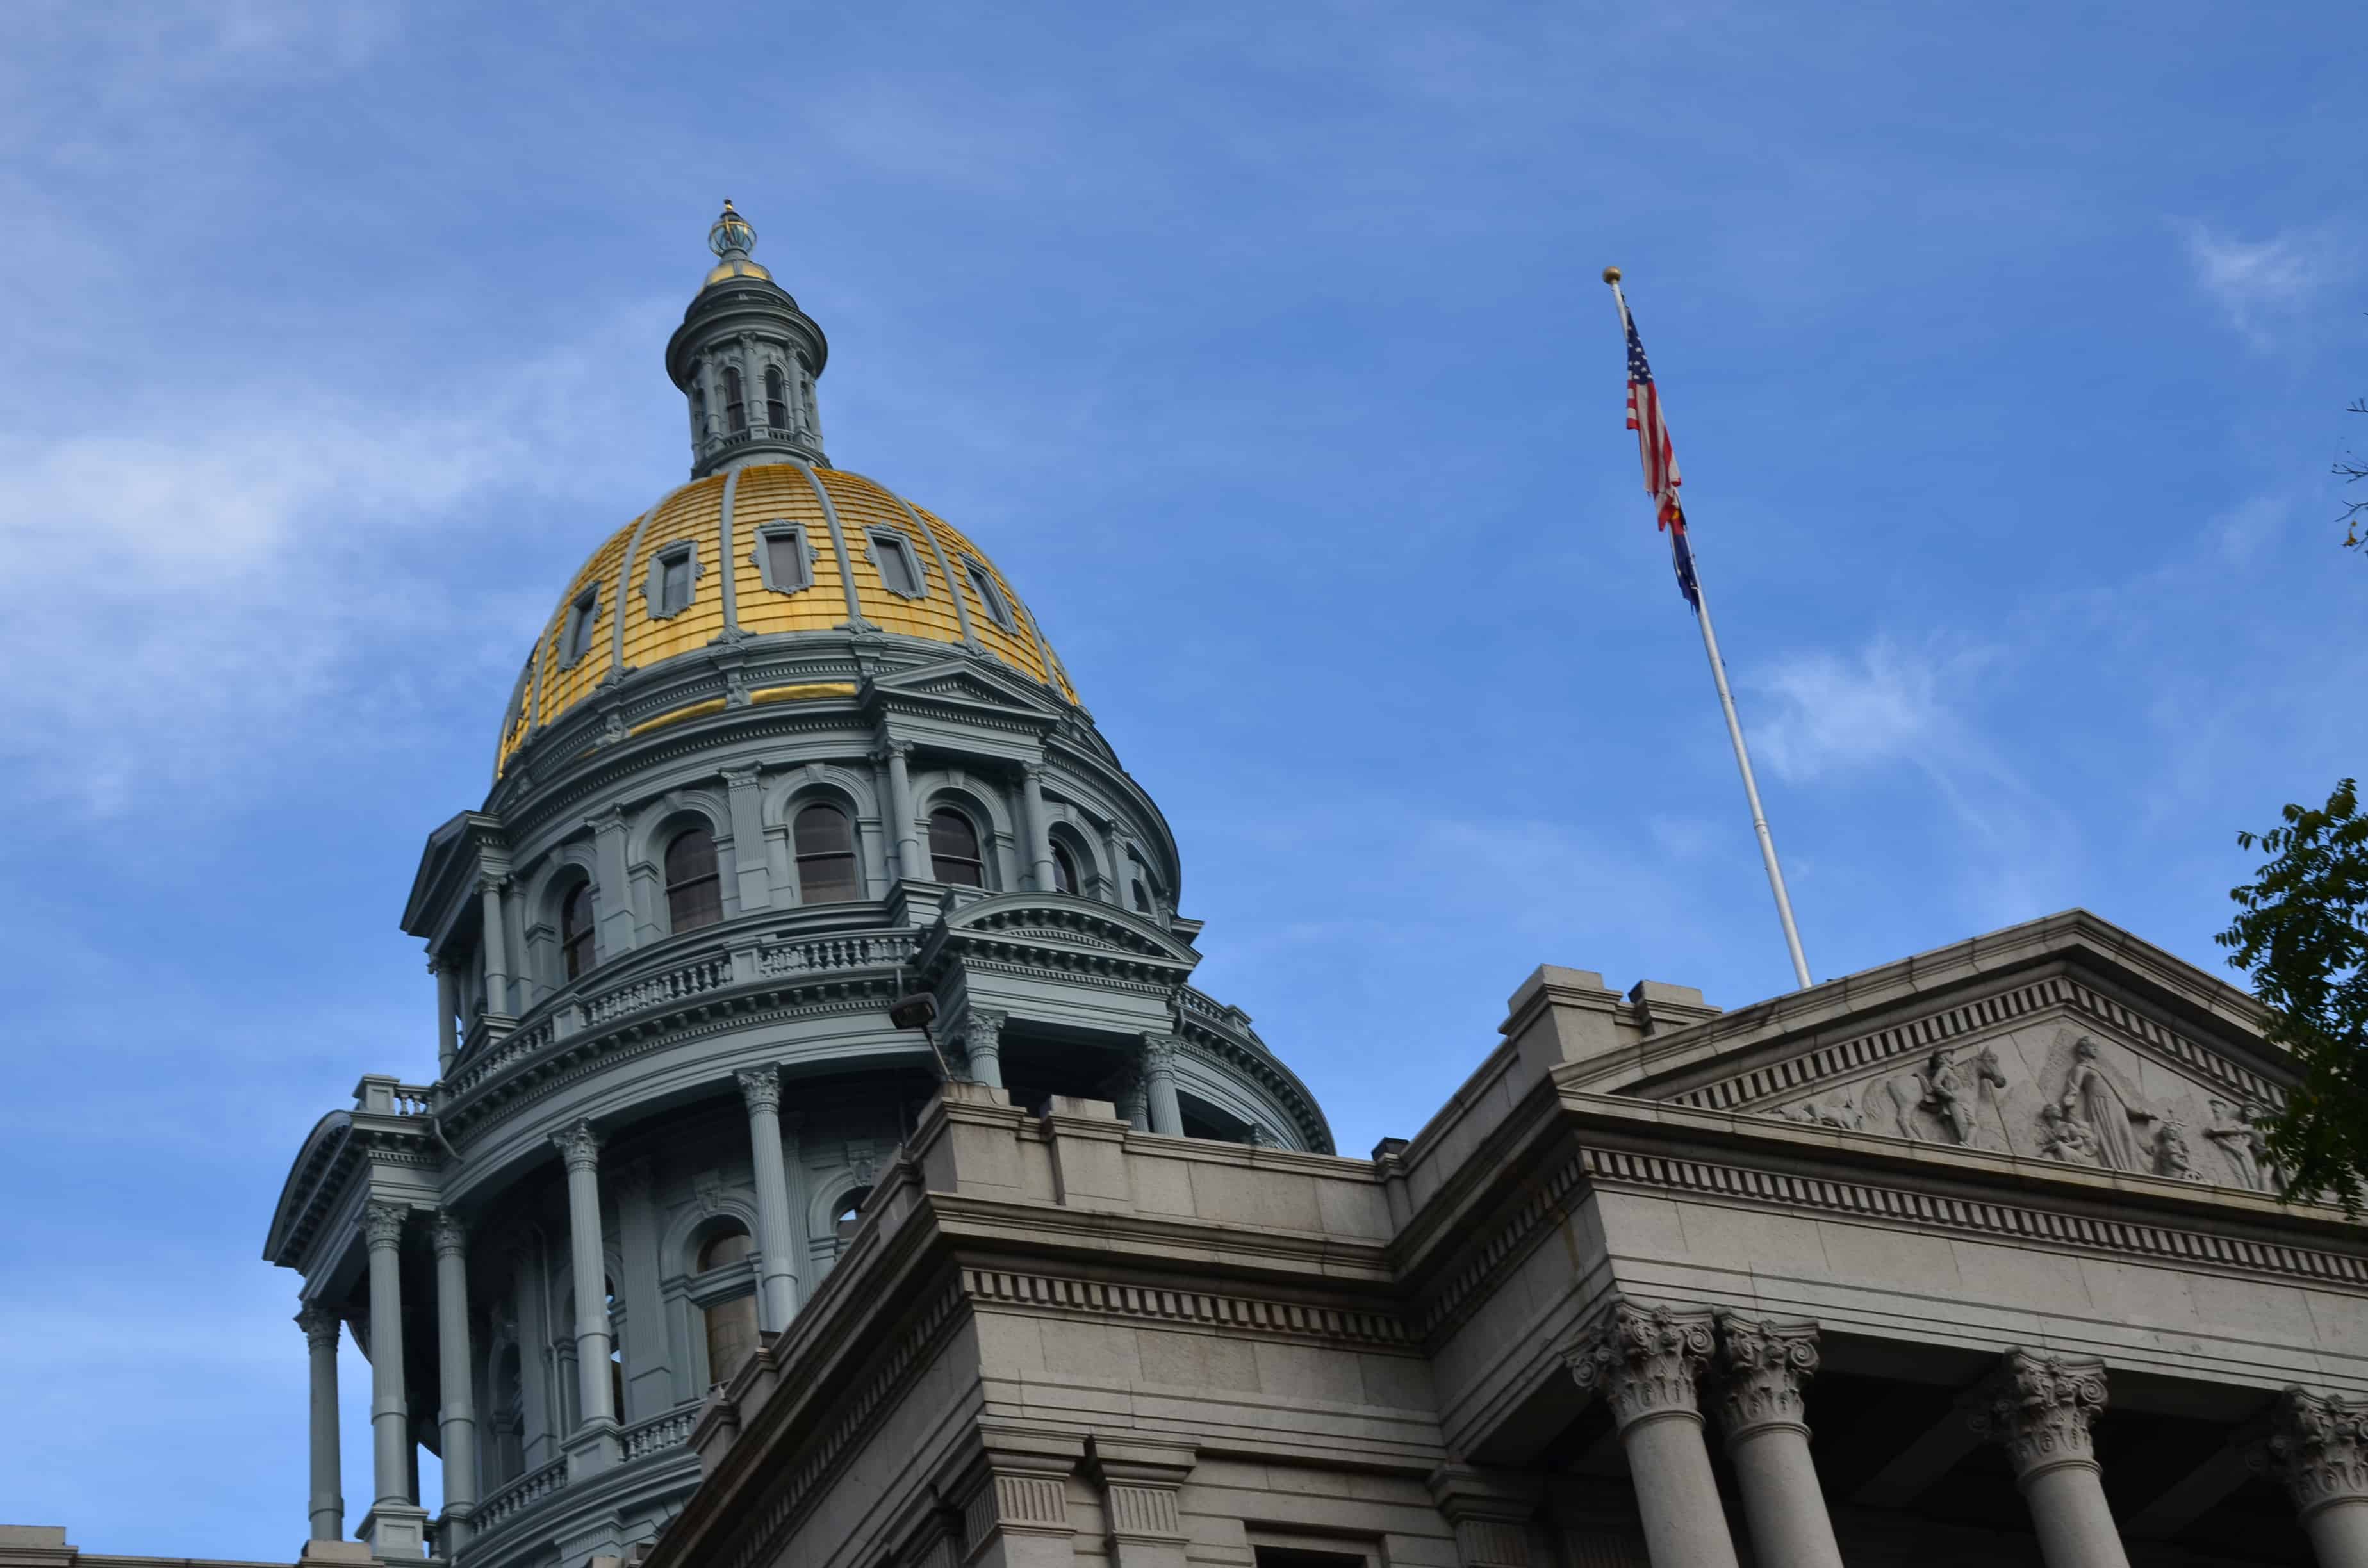 Dome of the Colorado State Capitol